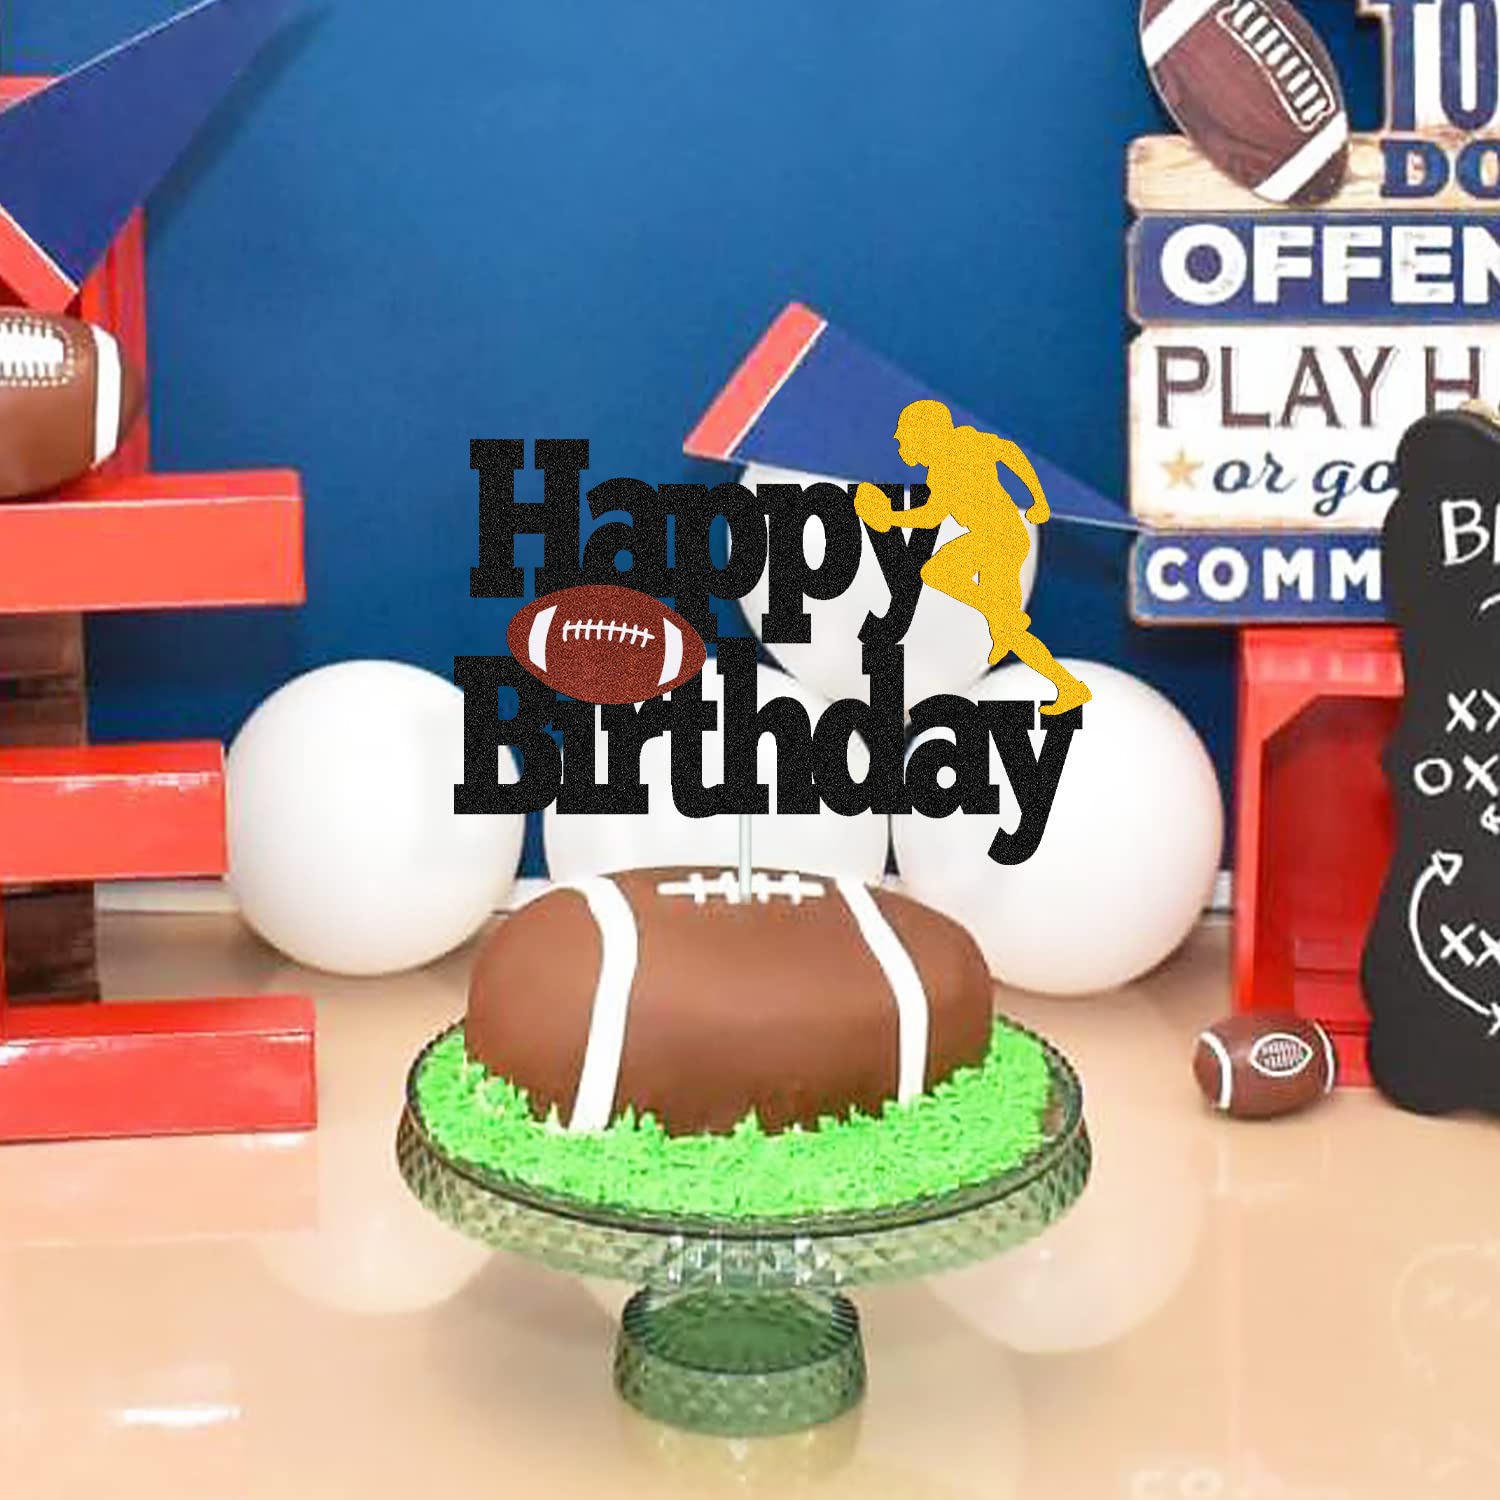 Football Cake Topper Rugby Ball Happy Birthday Cake Decorations for Man Kids Boy Girl Sport Game Day Super Bowl Touchdown Themed Party Supplies Black Sparkle Decor